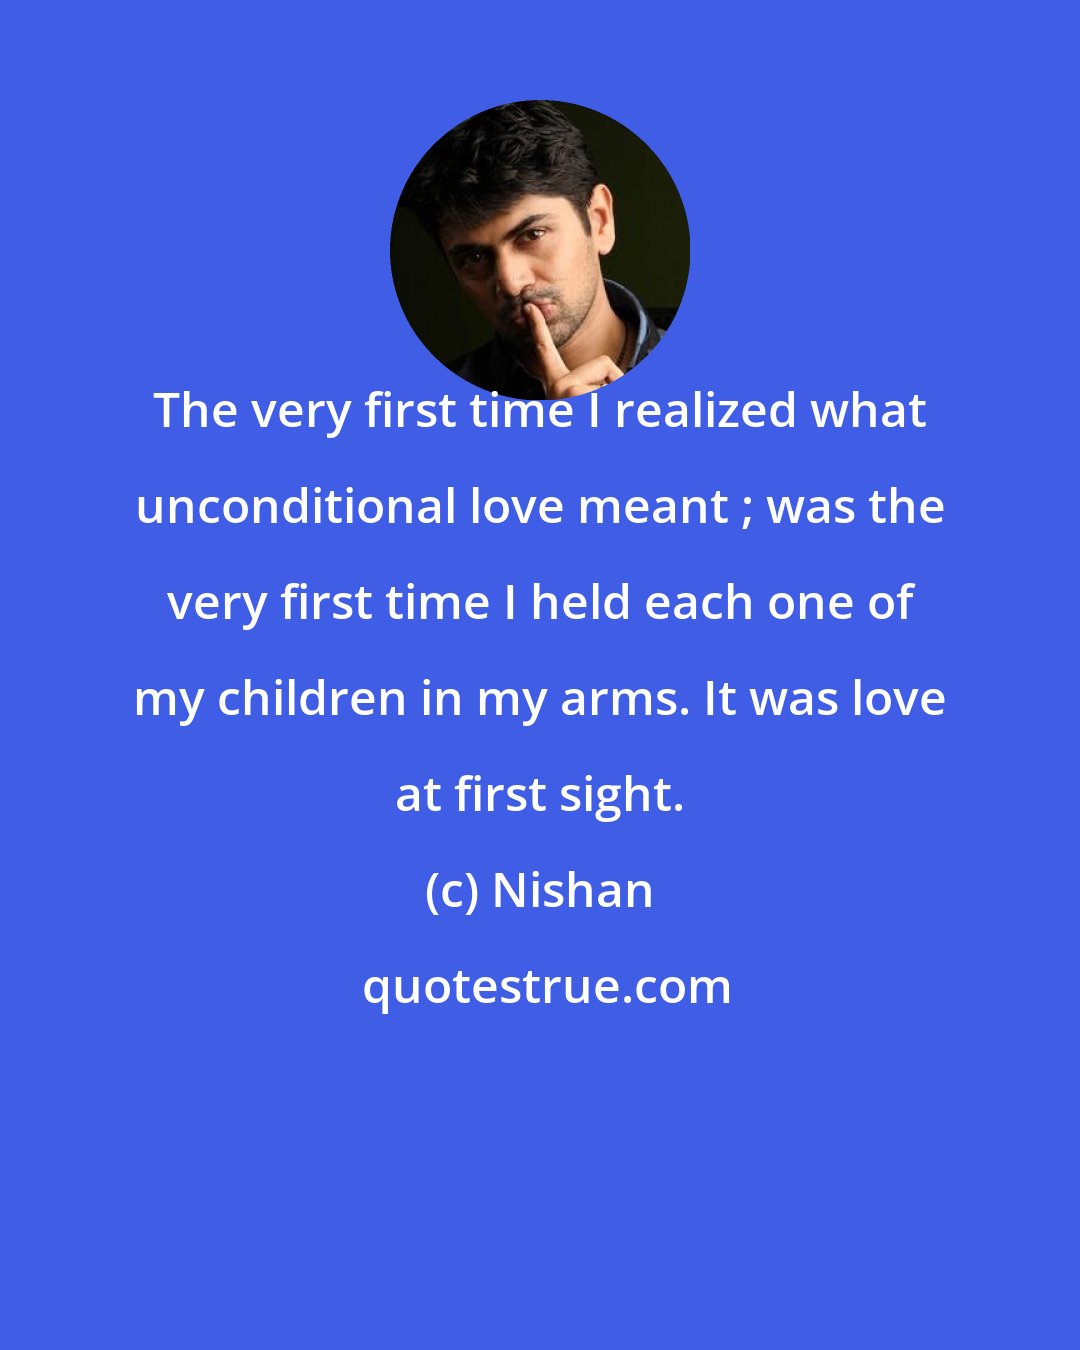 Nishan: The very first time I realized what unconditional love meant ; was the very first time I held each one of my children in my arms. It was love at first sight.